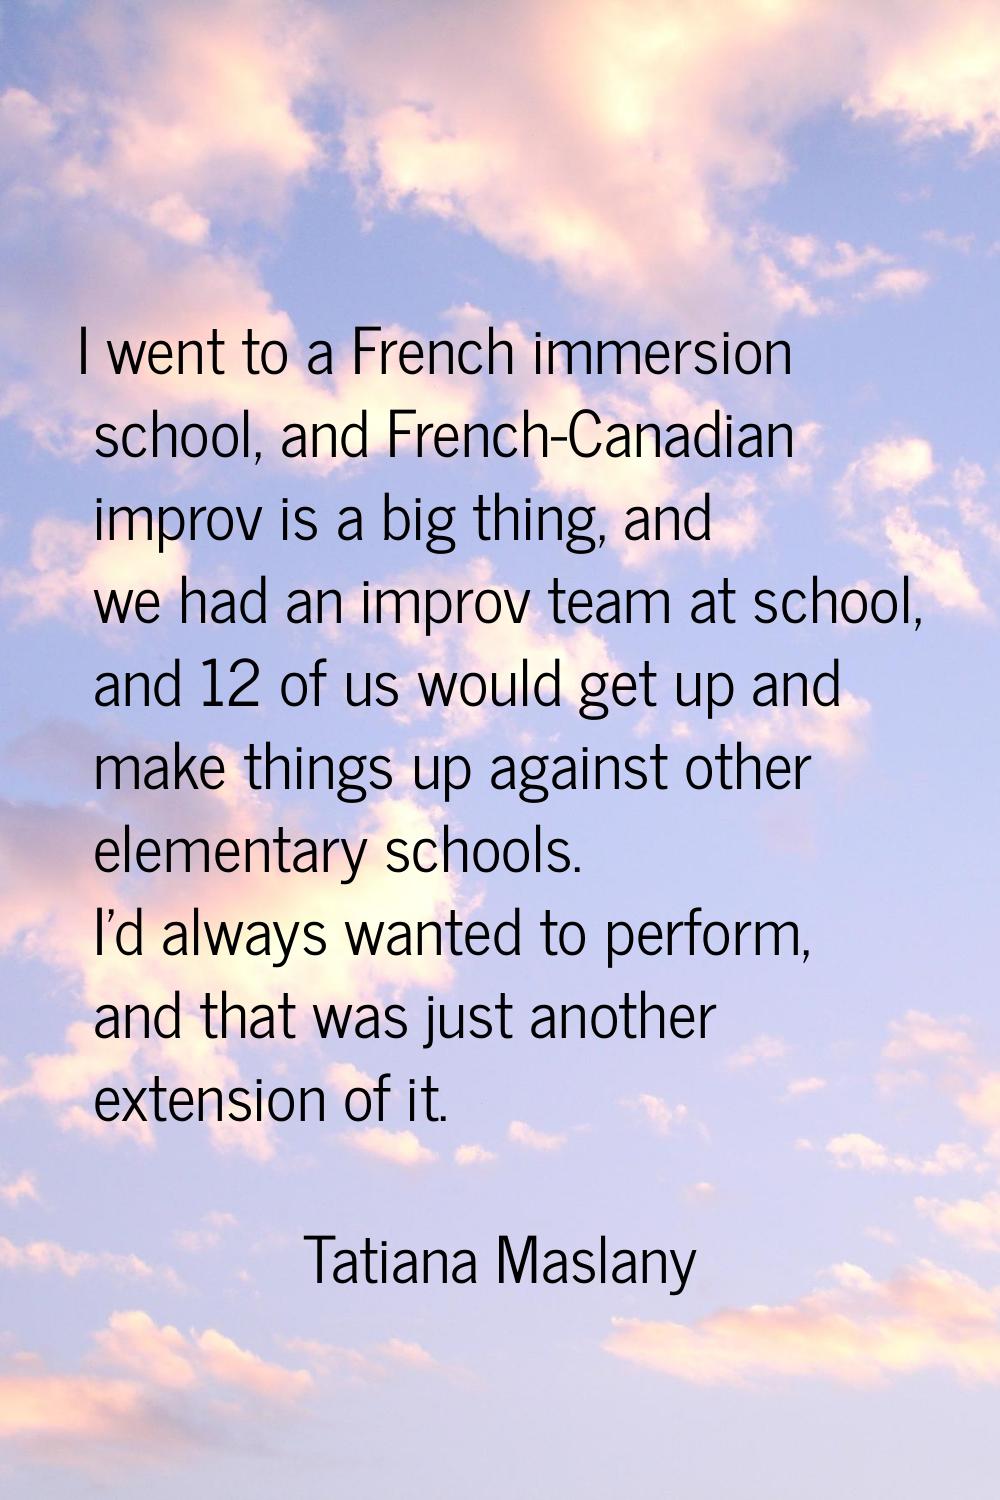 I went to a French immersion school, and French-Canadian improv is a big thing, and we had an impro